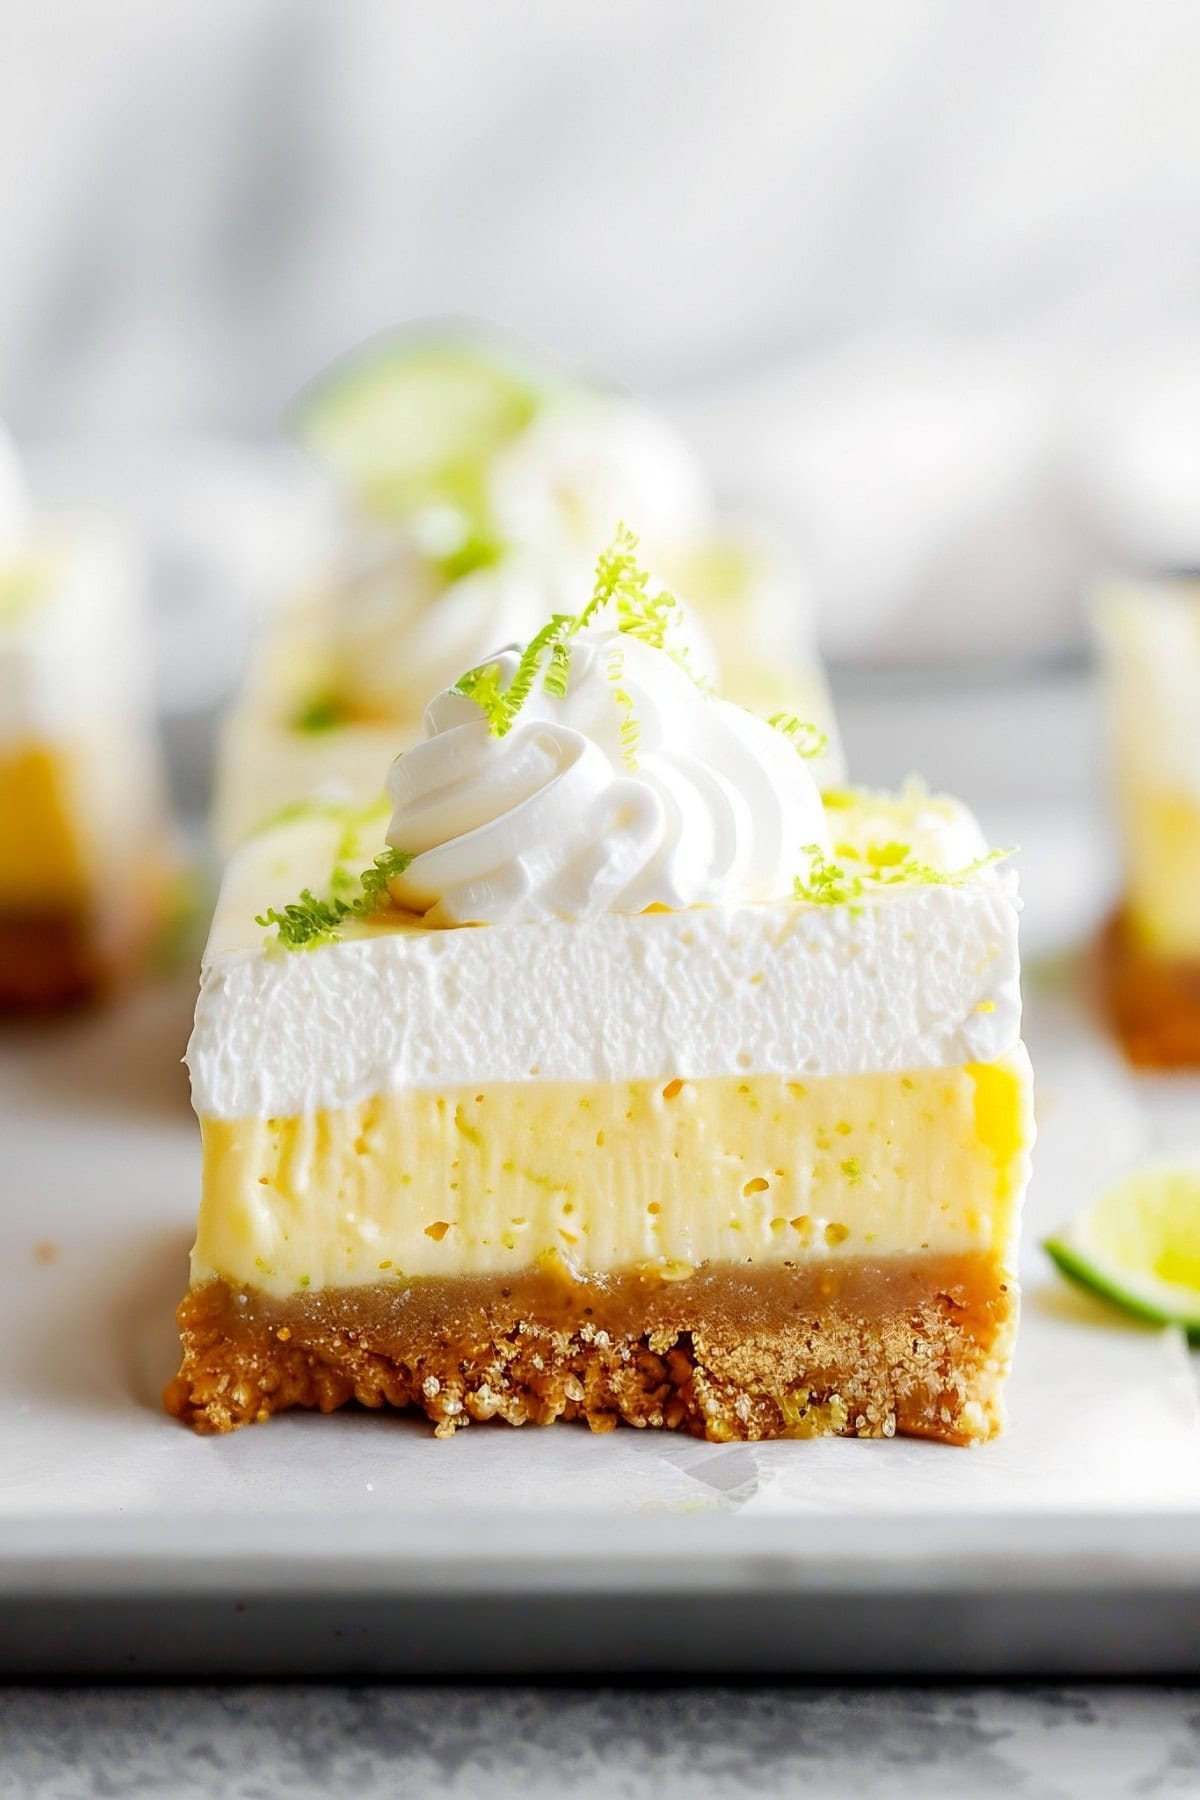 Flavorful homemade key lime squares, featuring a smooth and velvety filling and a thick layer of whipped cream on top